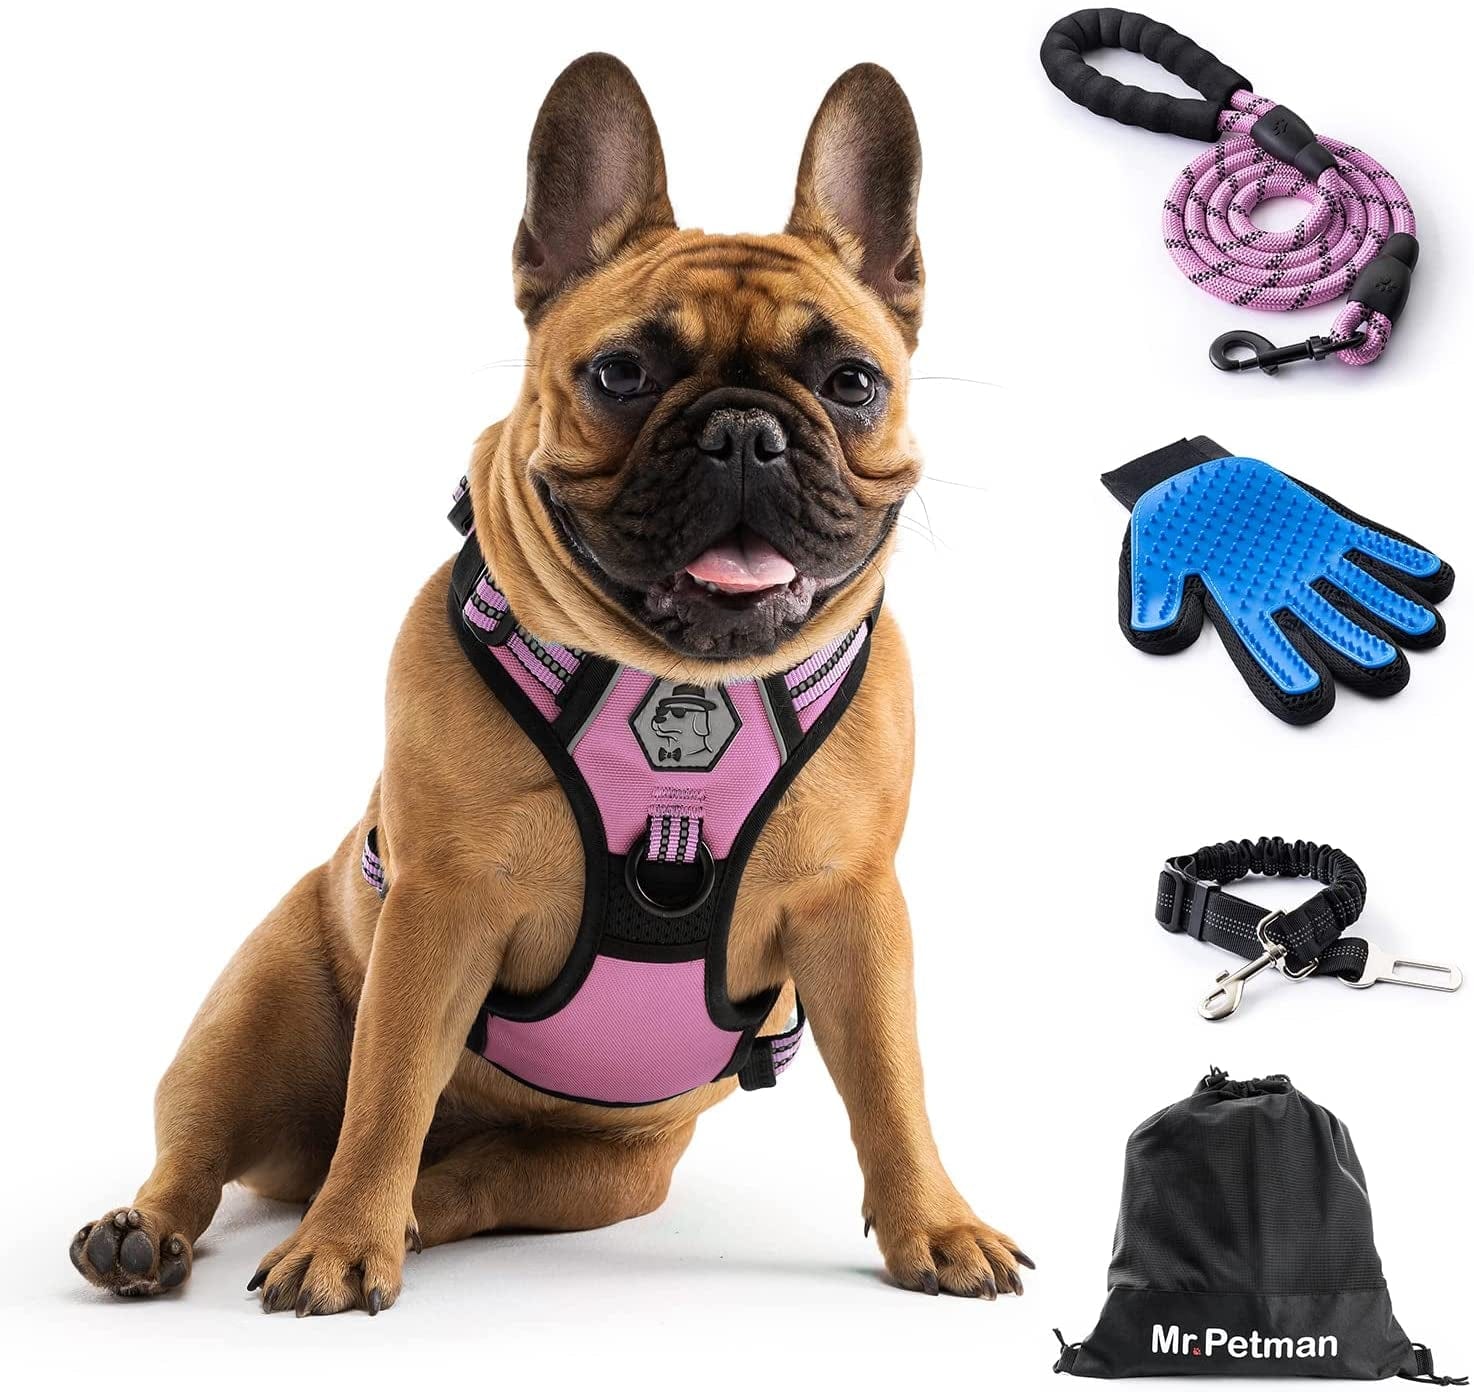 MR. PETMAN No Pull Dog Harness with Leash, Seat Belt, Grooming Glove - No Choke Dog Harness Set for Small Medium Large Dogs- Reflective Adjustable Dog Vest Harnesses with Handle for Walking Training Animals & Pet Supplies > Pet Supplies > Dog Supplies > Dog Apparel Mr. Petman Baby Pink Small 